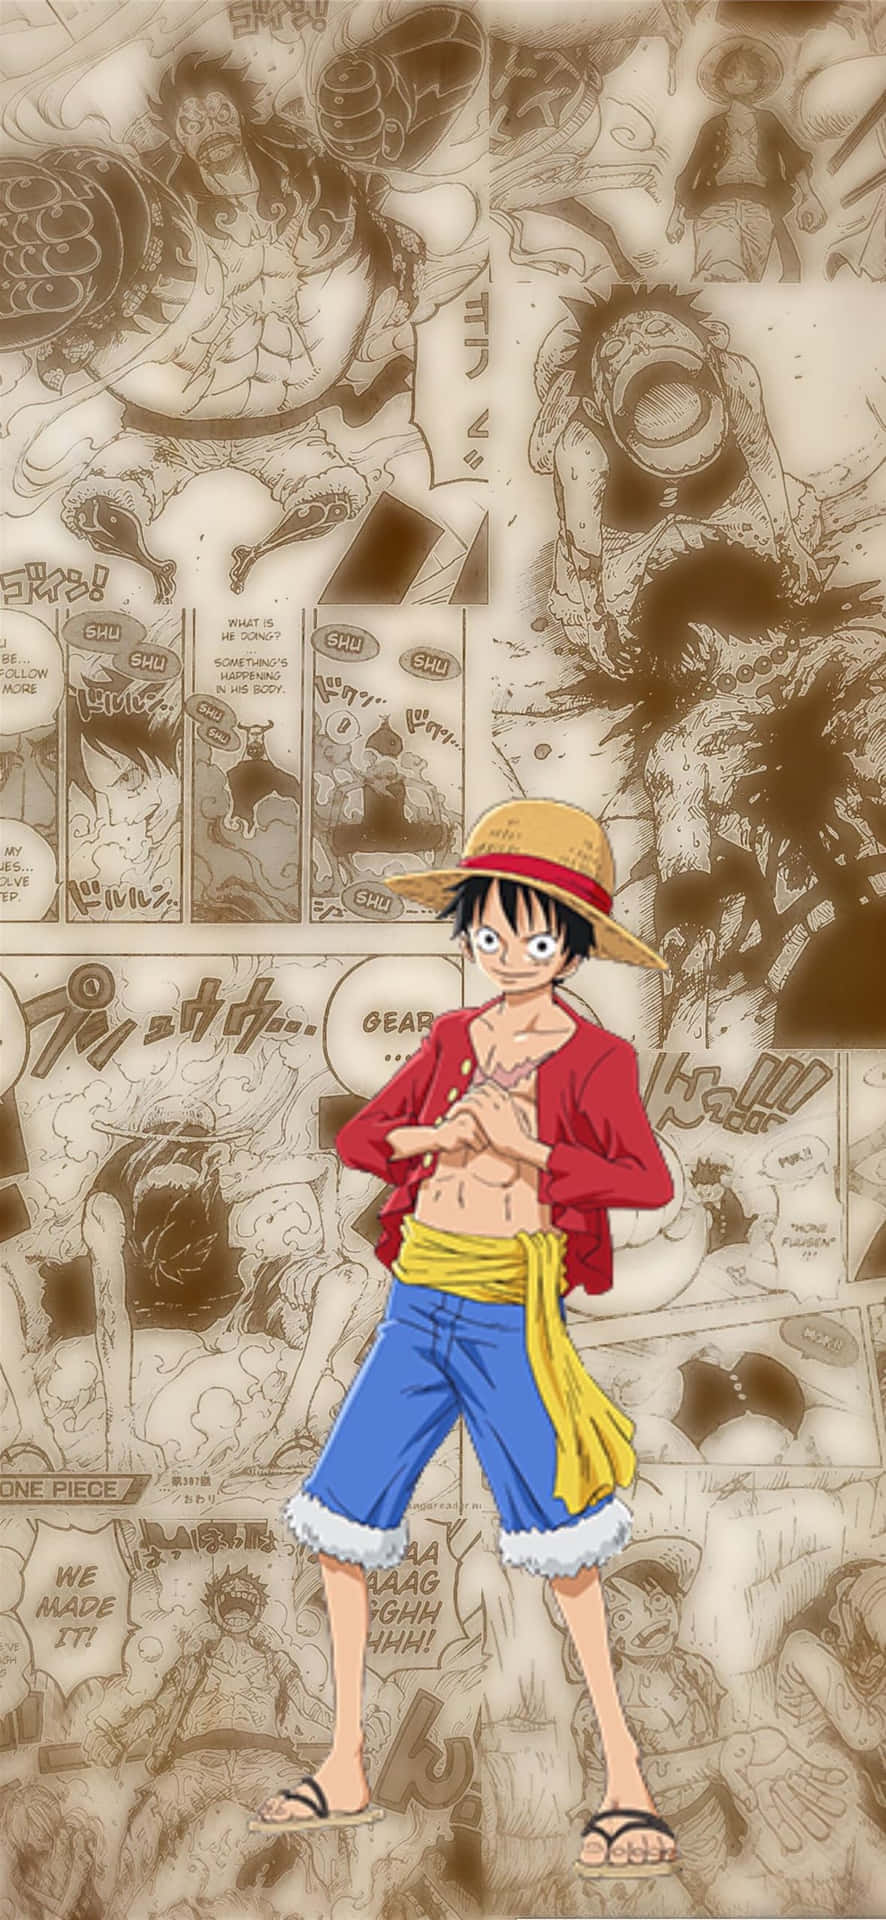 One Piece Luffy Gear 5 4K Live Wallpaper | Anime Live Wallpapers